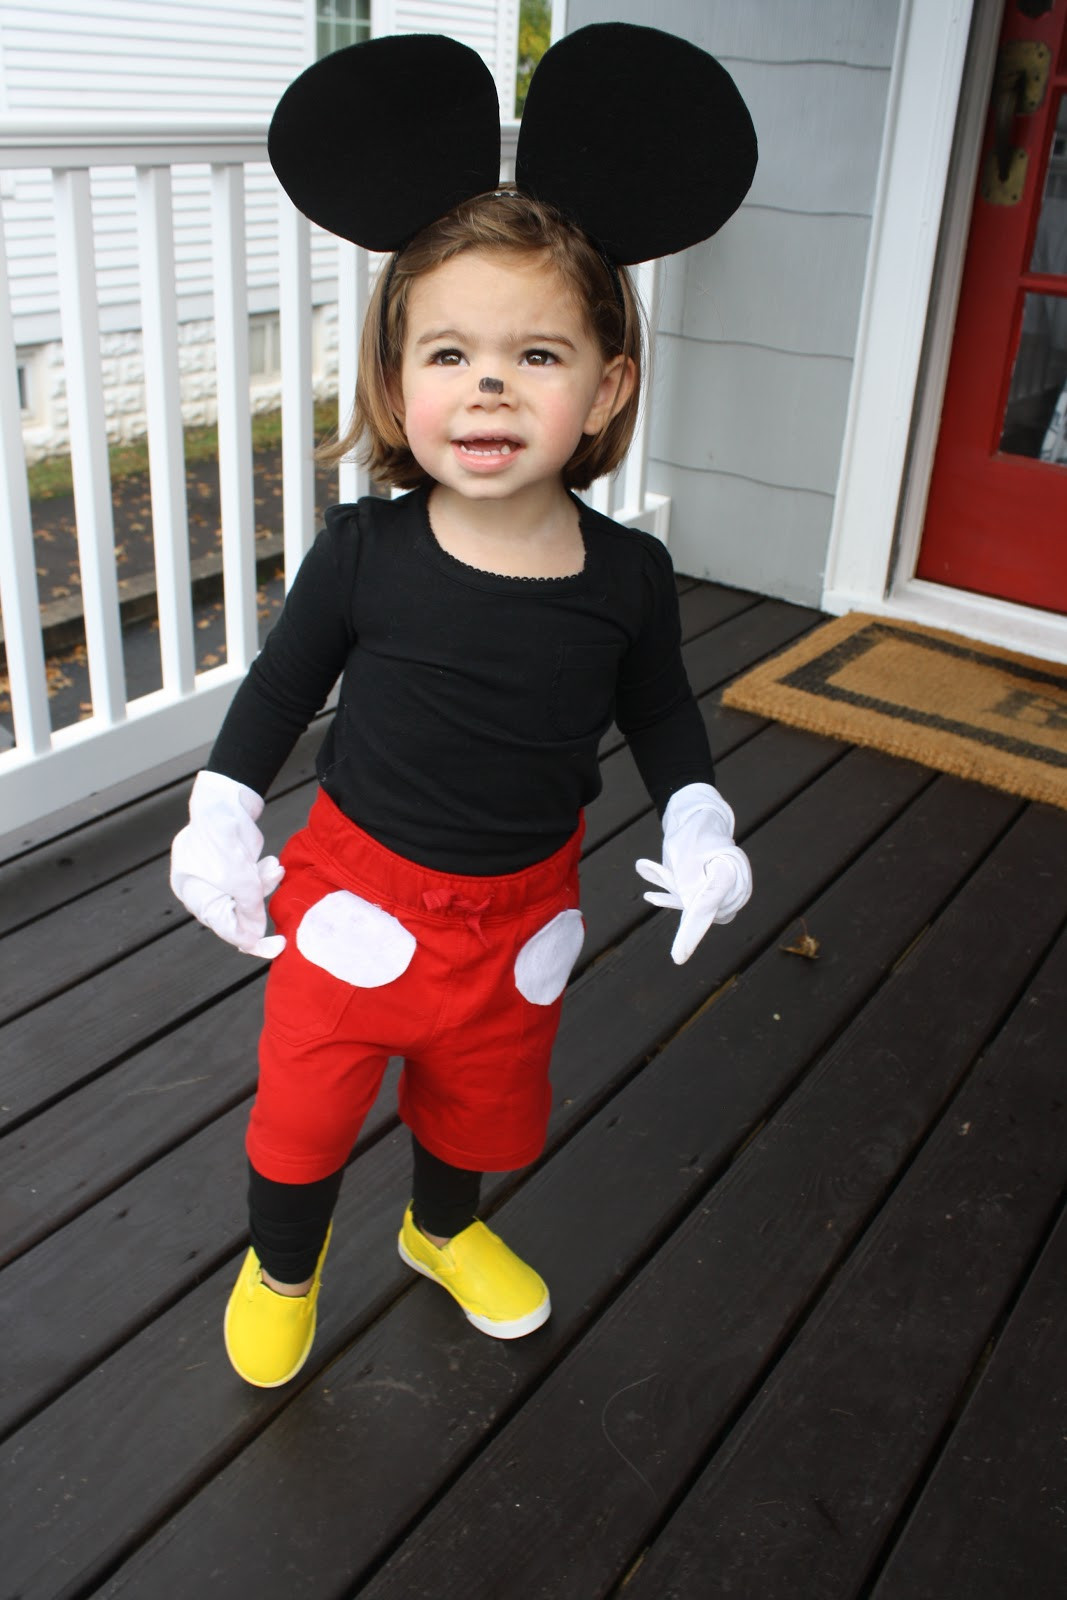 DIY Minnie Mouse Costume For Toddler
 East Coast Mommy 20 Awesome No Sew Costumes for Kids